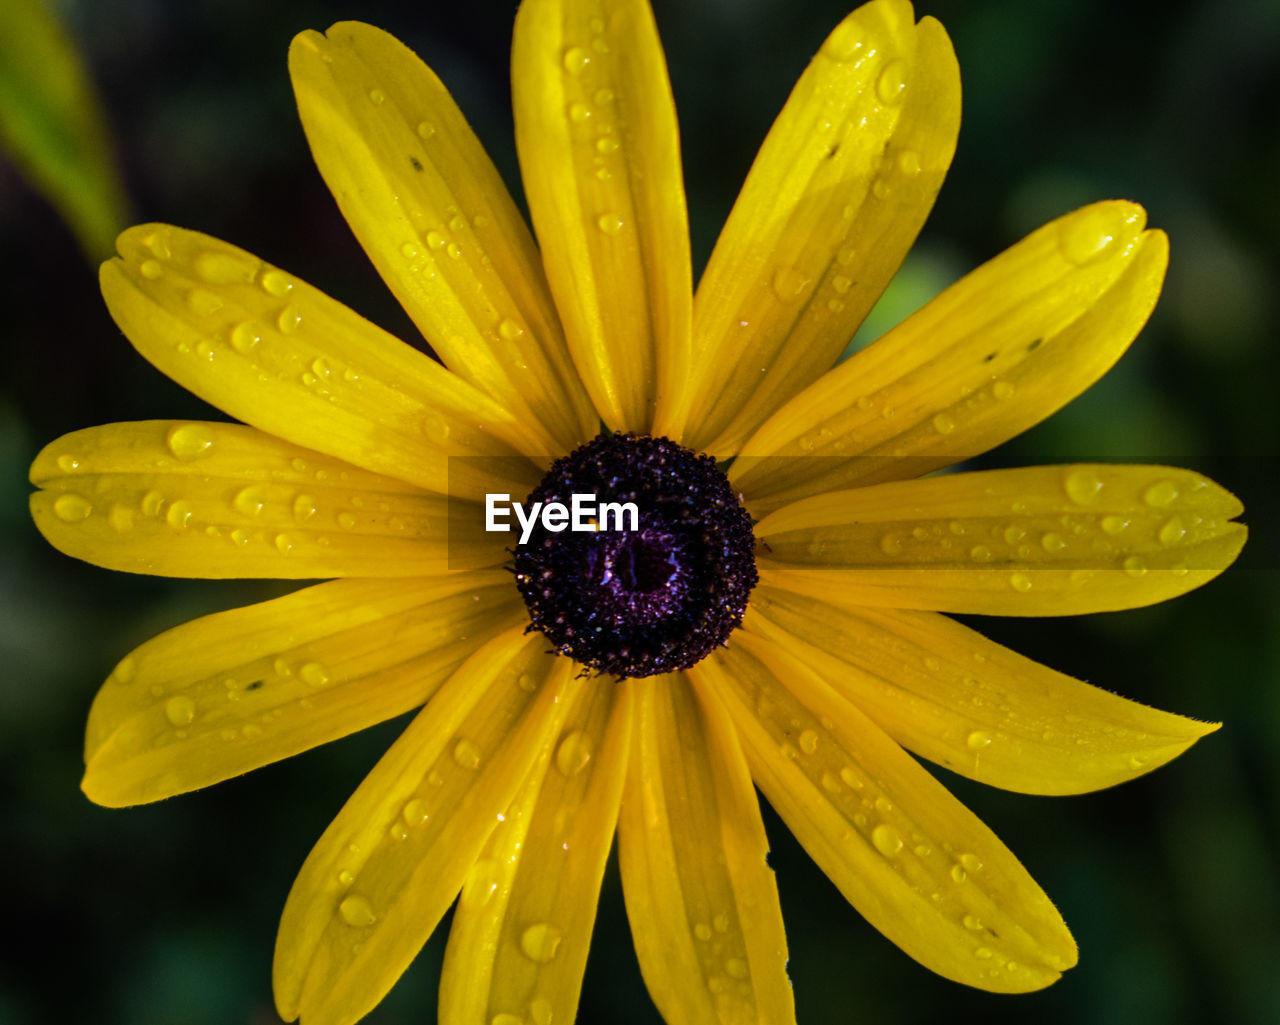 CLOSE-UP OF WET YELLOW FLOWER IN BLOOM